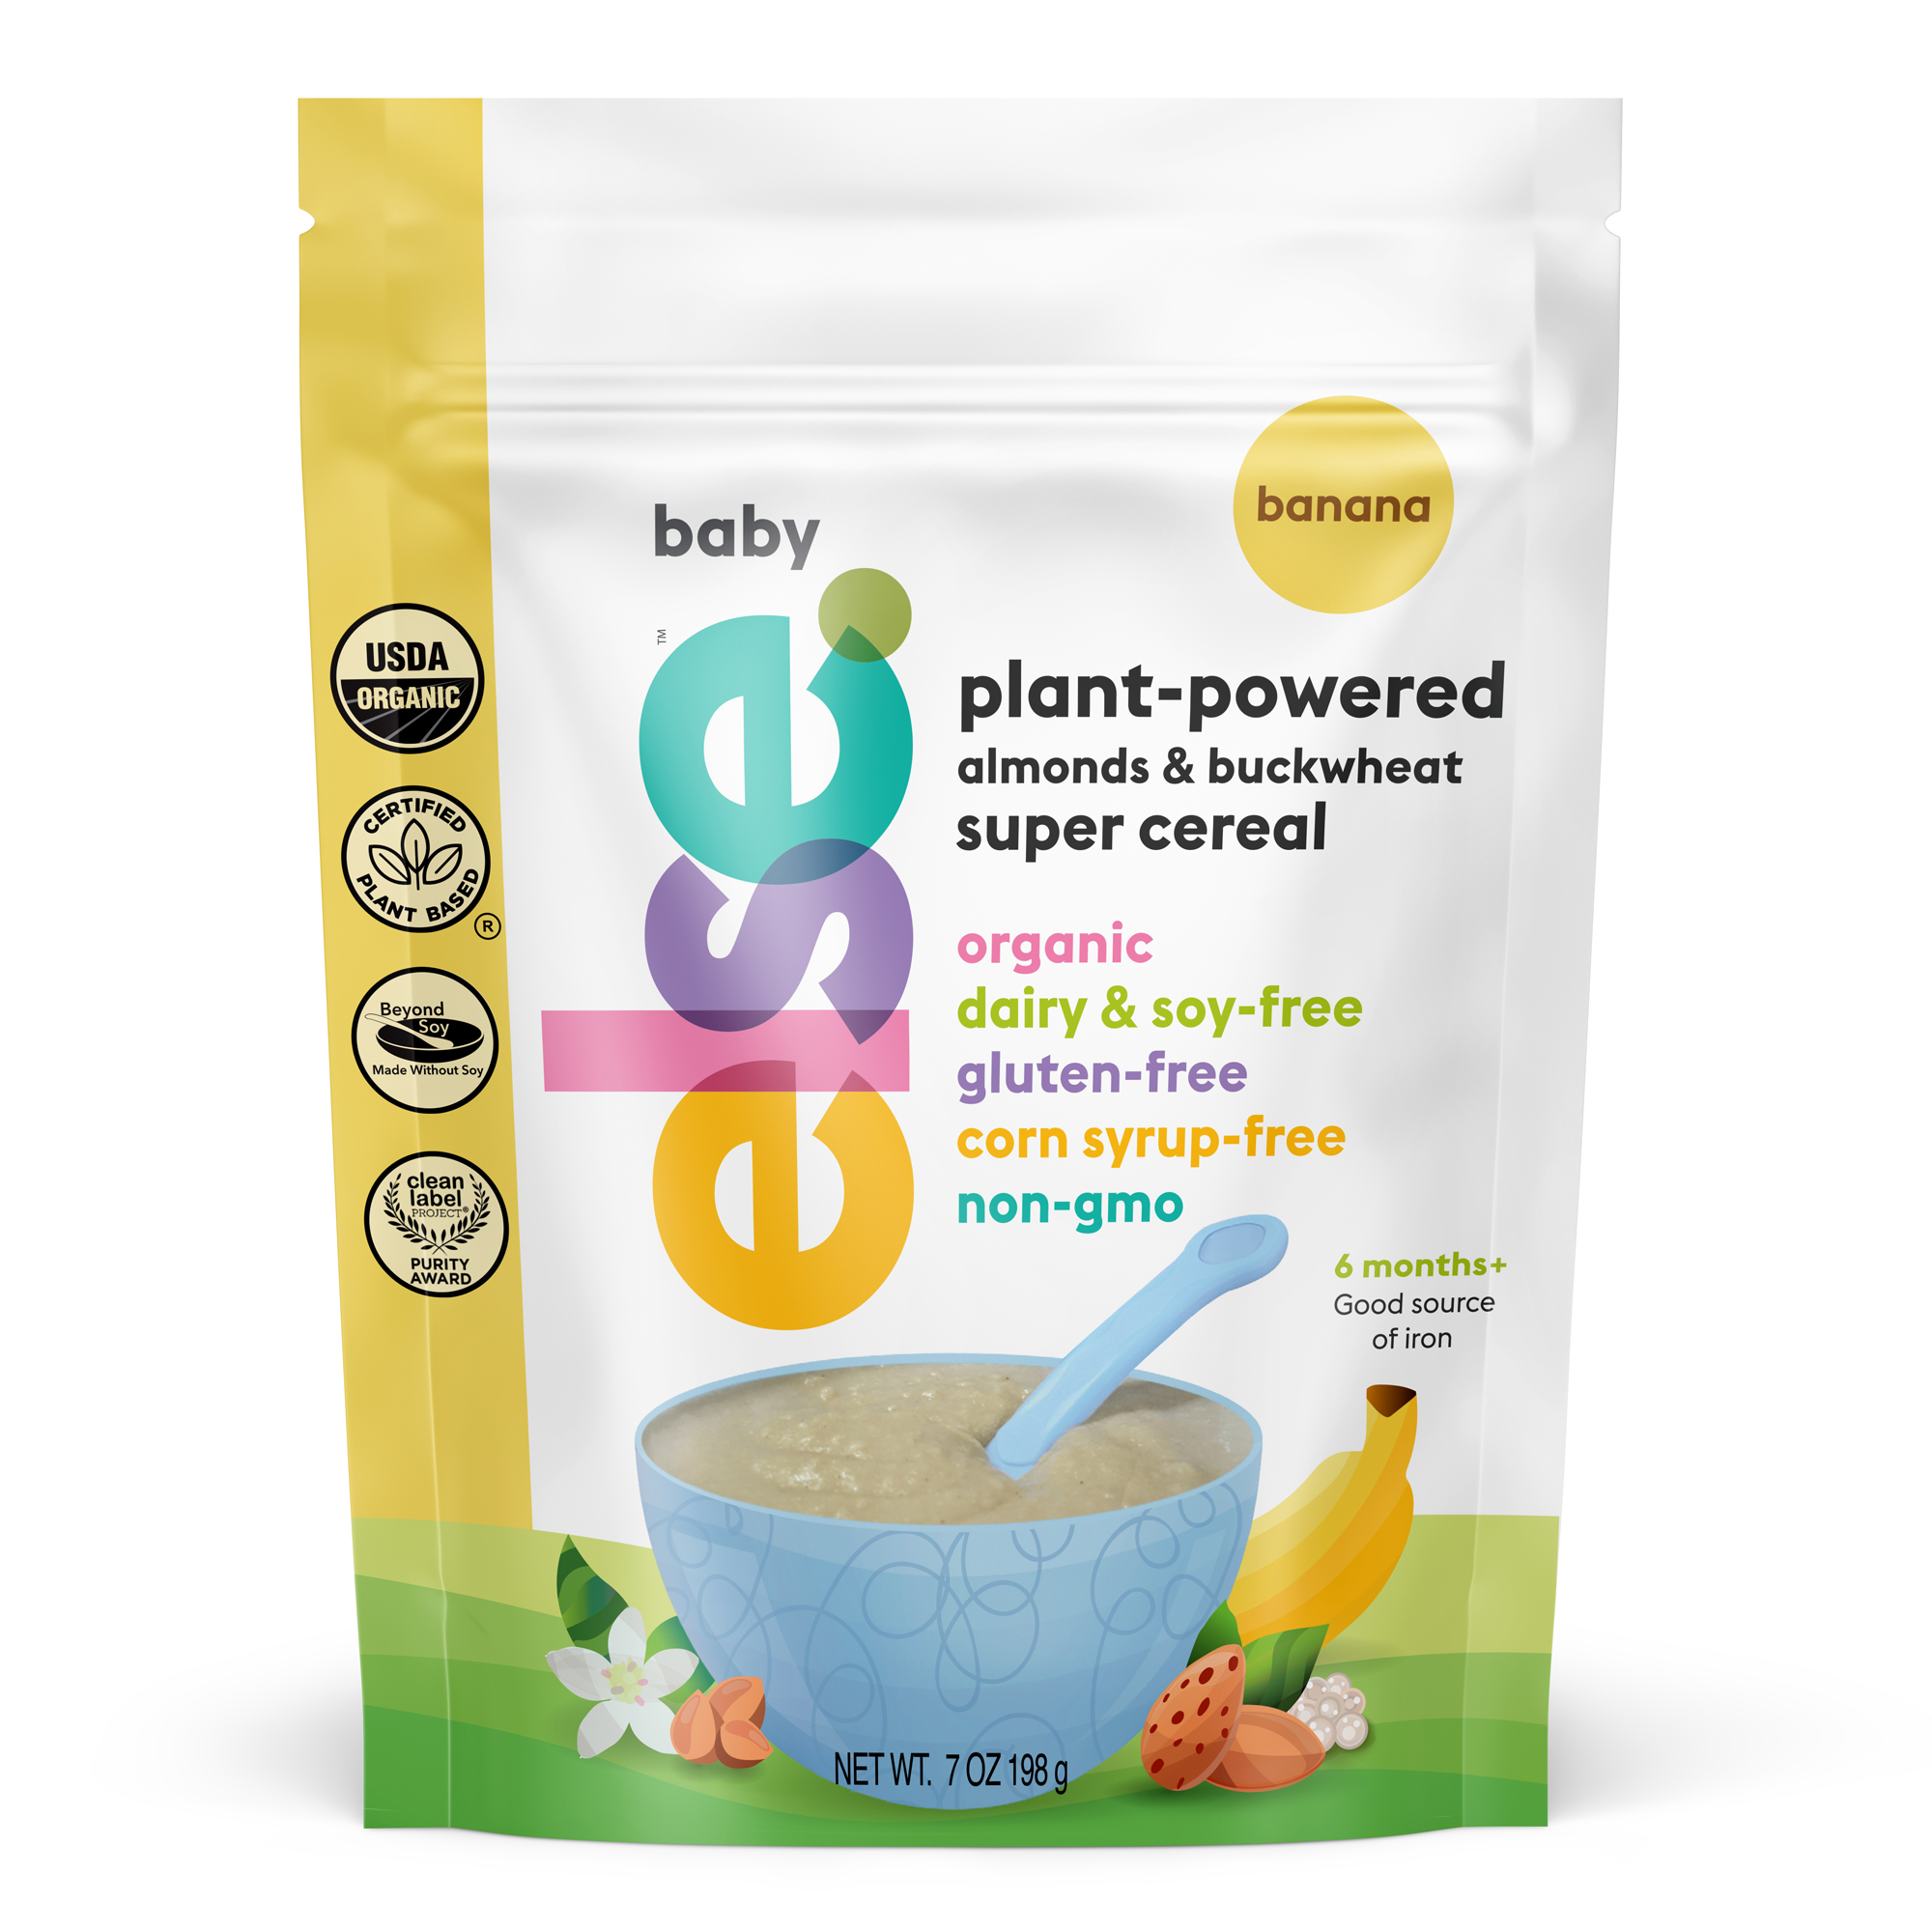 Else Nutrition Baby Plant-Powered Almonds & Buckwheat Super Cereal, Banana 12 units per case 7.0 oz